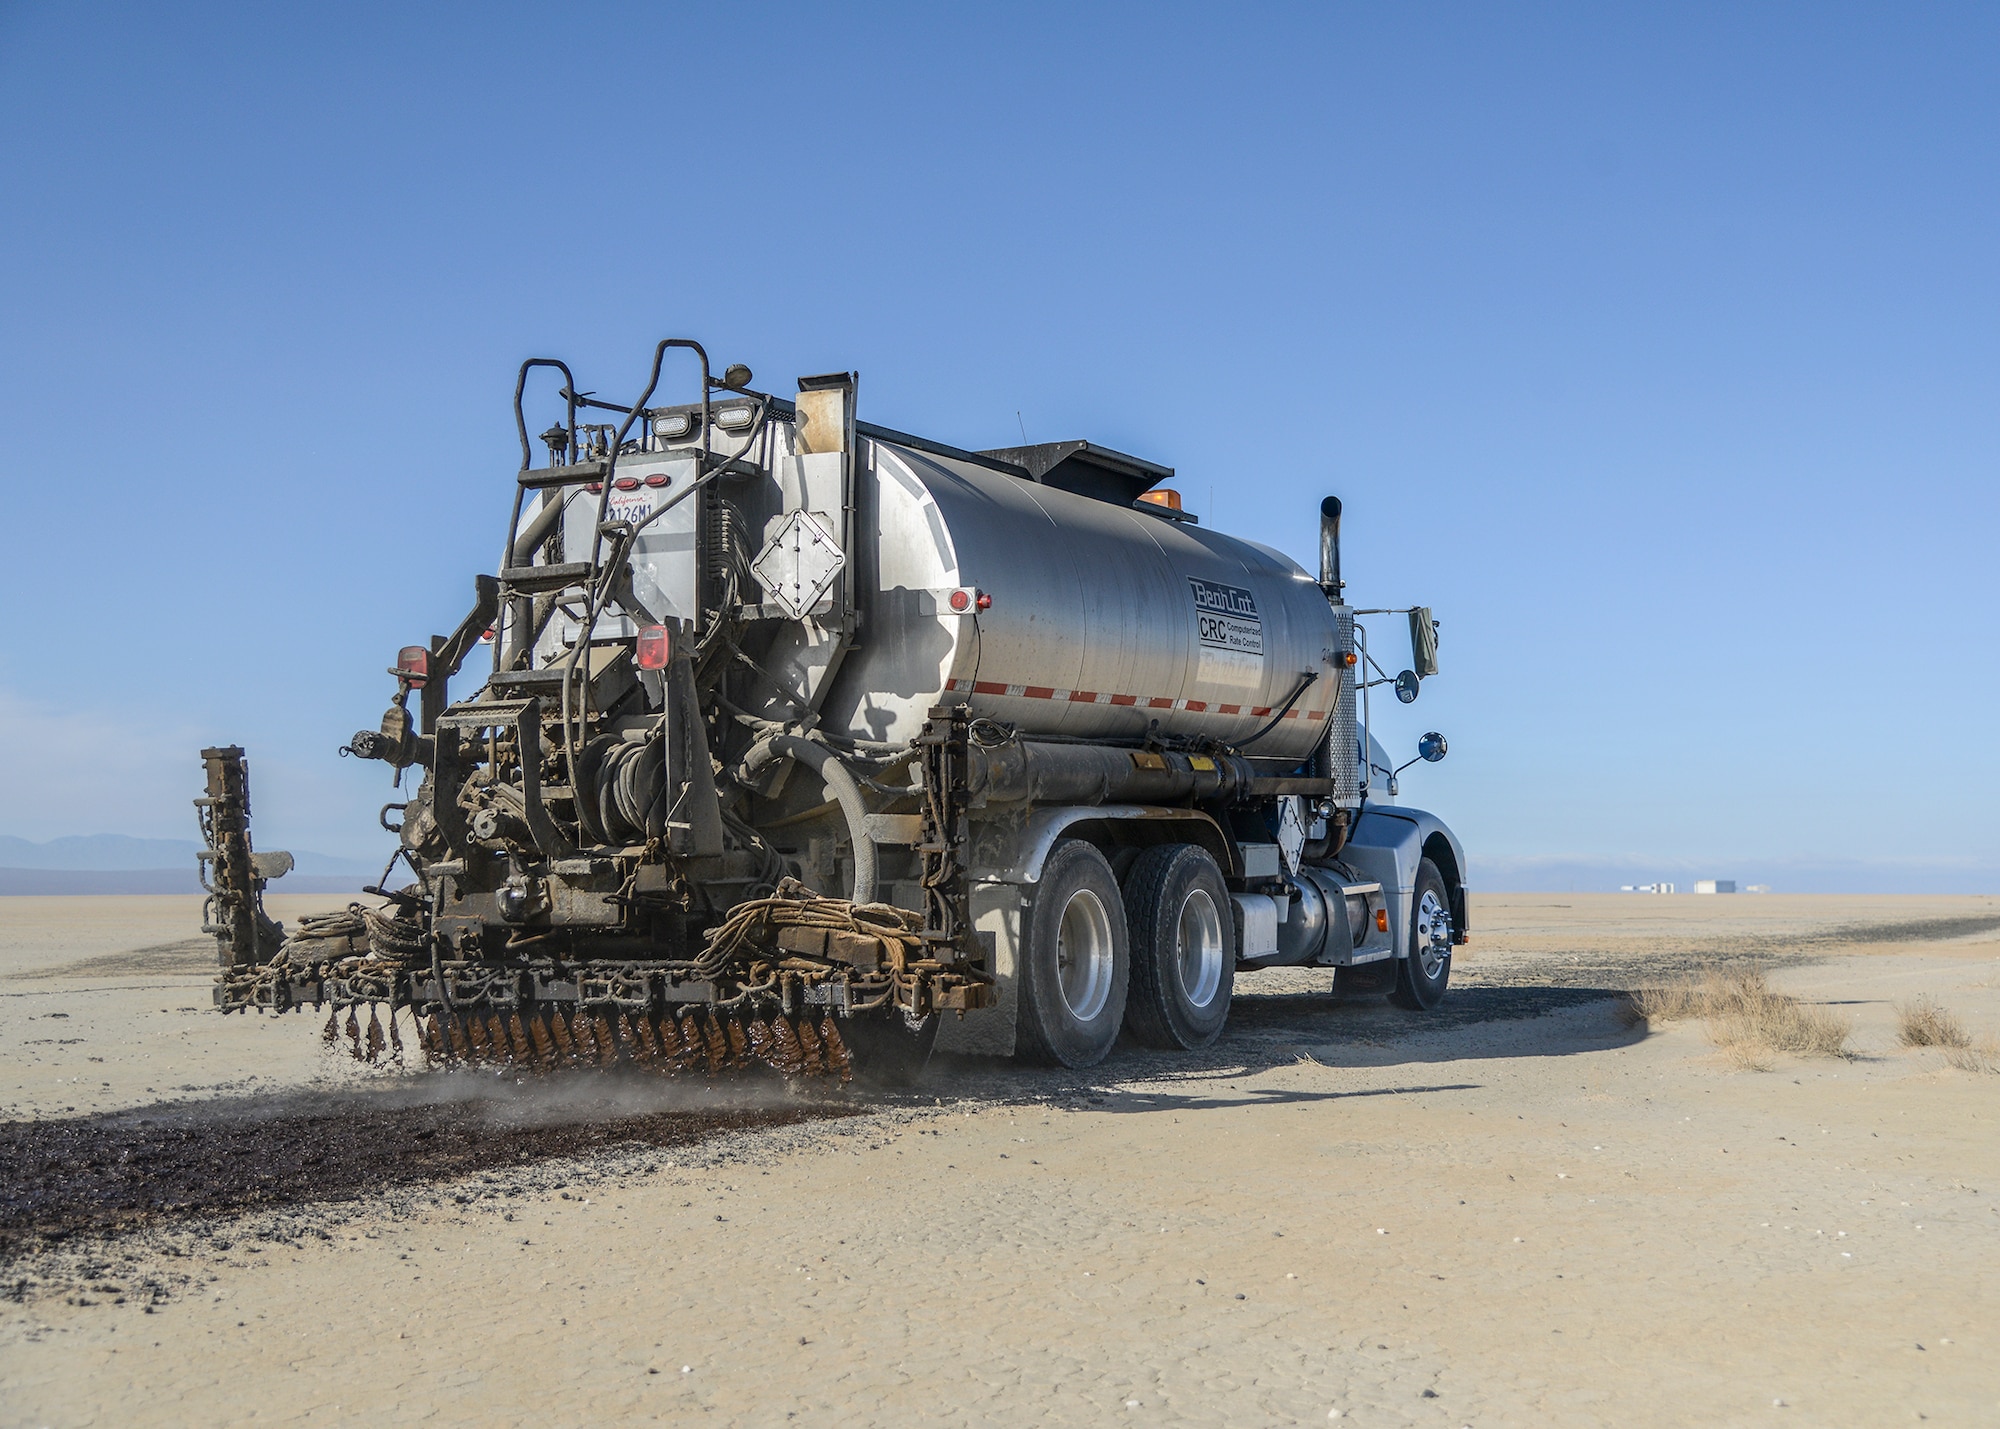 Oil spreader trucks can hold up to 5,000 gallons of SSH1. (U.S. Air Force photo by Rebecca Amber)